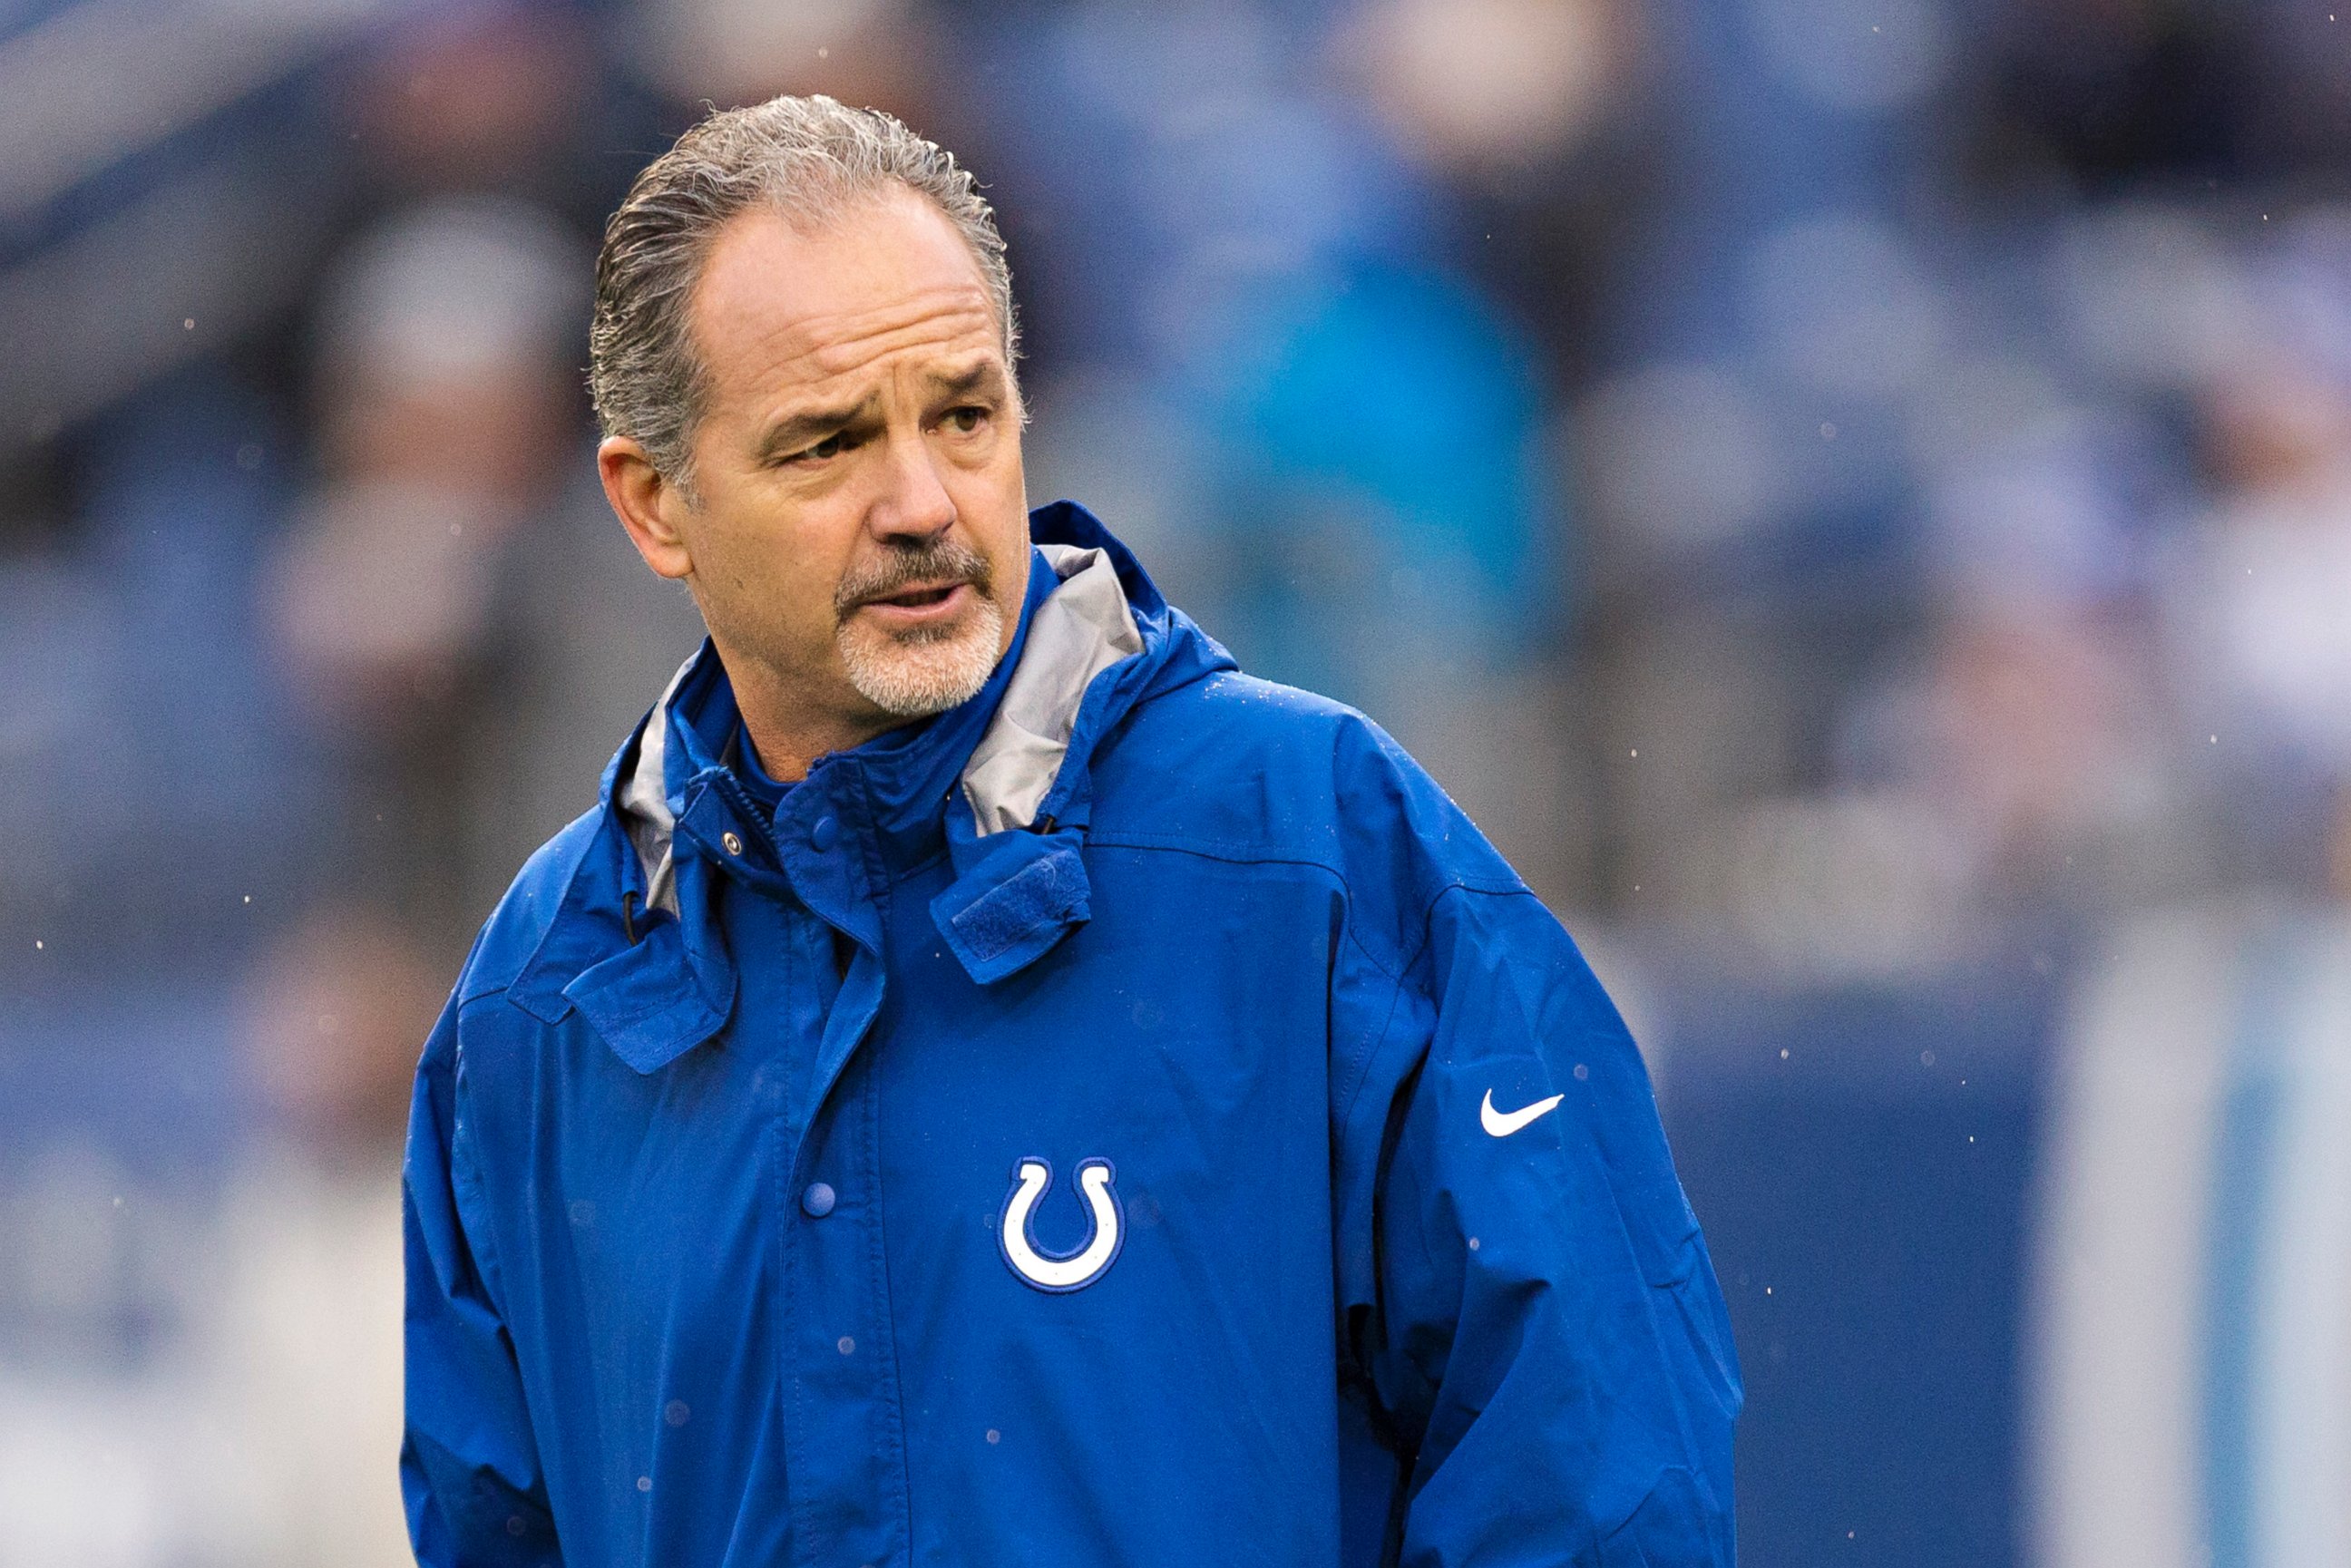 PHOTO: Head Coach Chuck Pagano of the Indianapolis Colts on the field before a game against the Tennessee Titans at LP Field on Dec. 28, 2014 in Nashville, Tenn.  